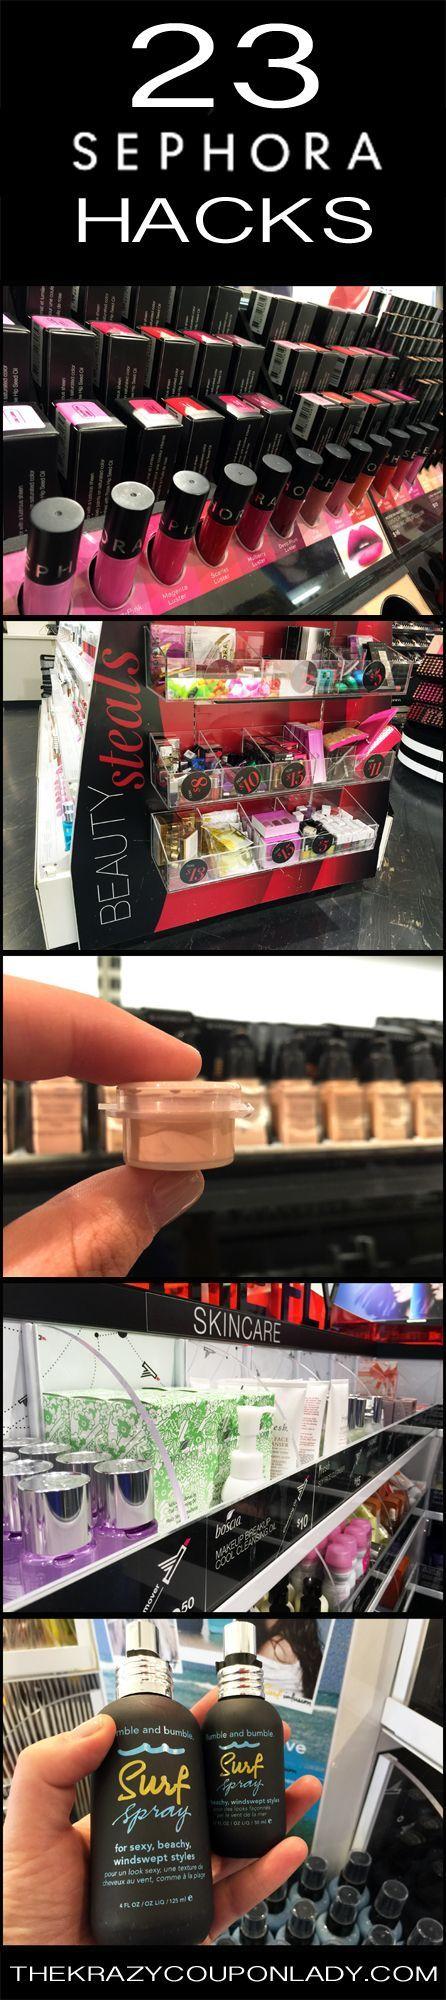 Hochzeit - 23 Insider Hacks From A Sephora Employee - The Krazy Coupon Lady